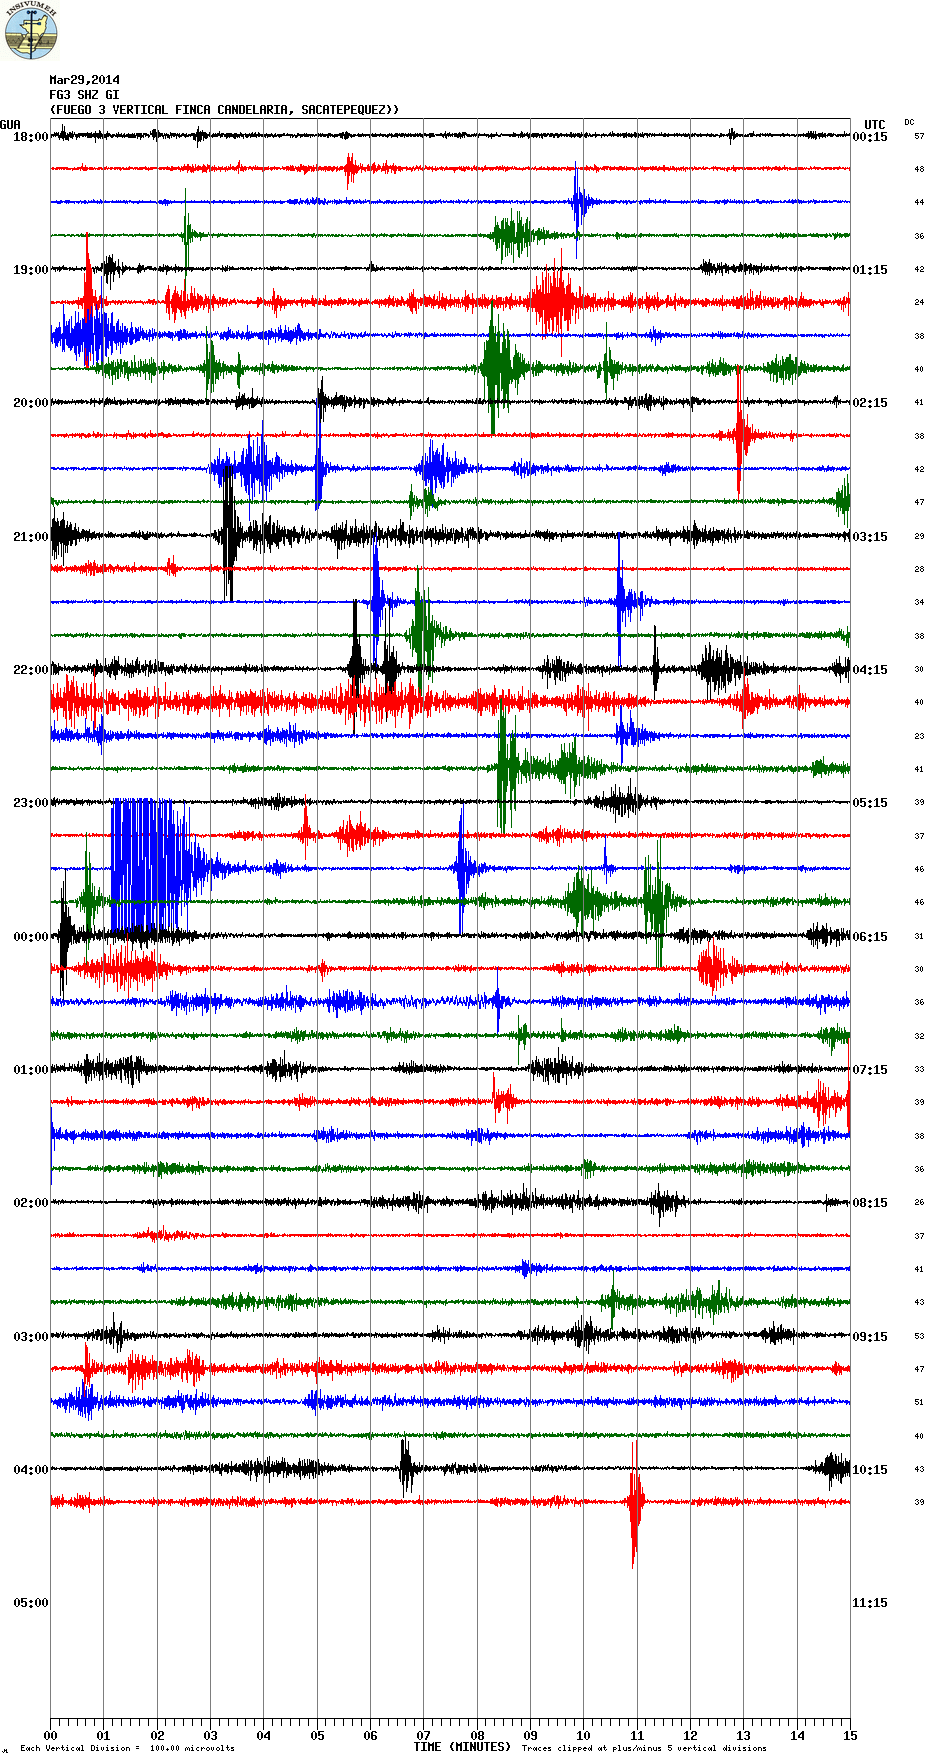 Current seismic signal of Fuego (FG3 station, INSIVUMEH)